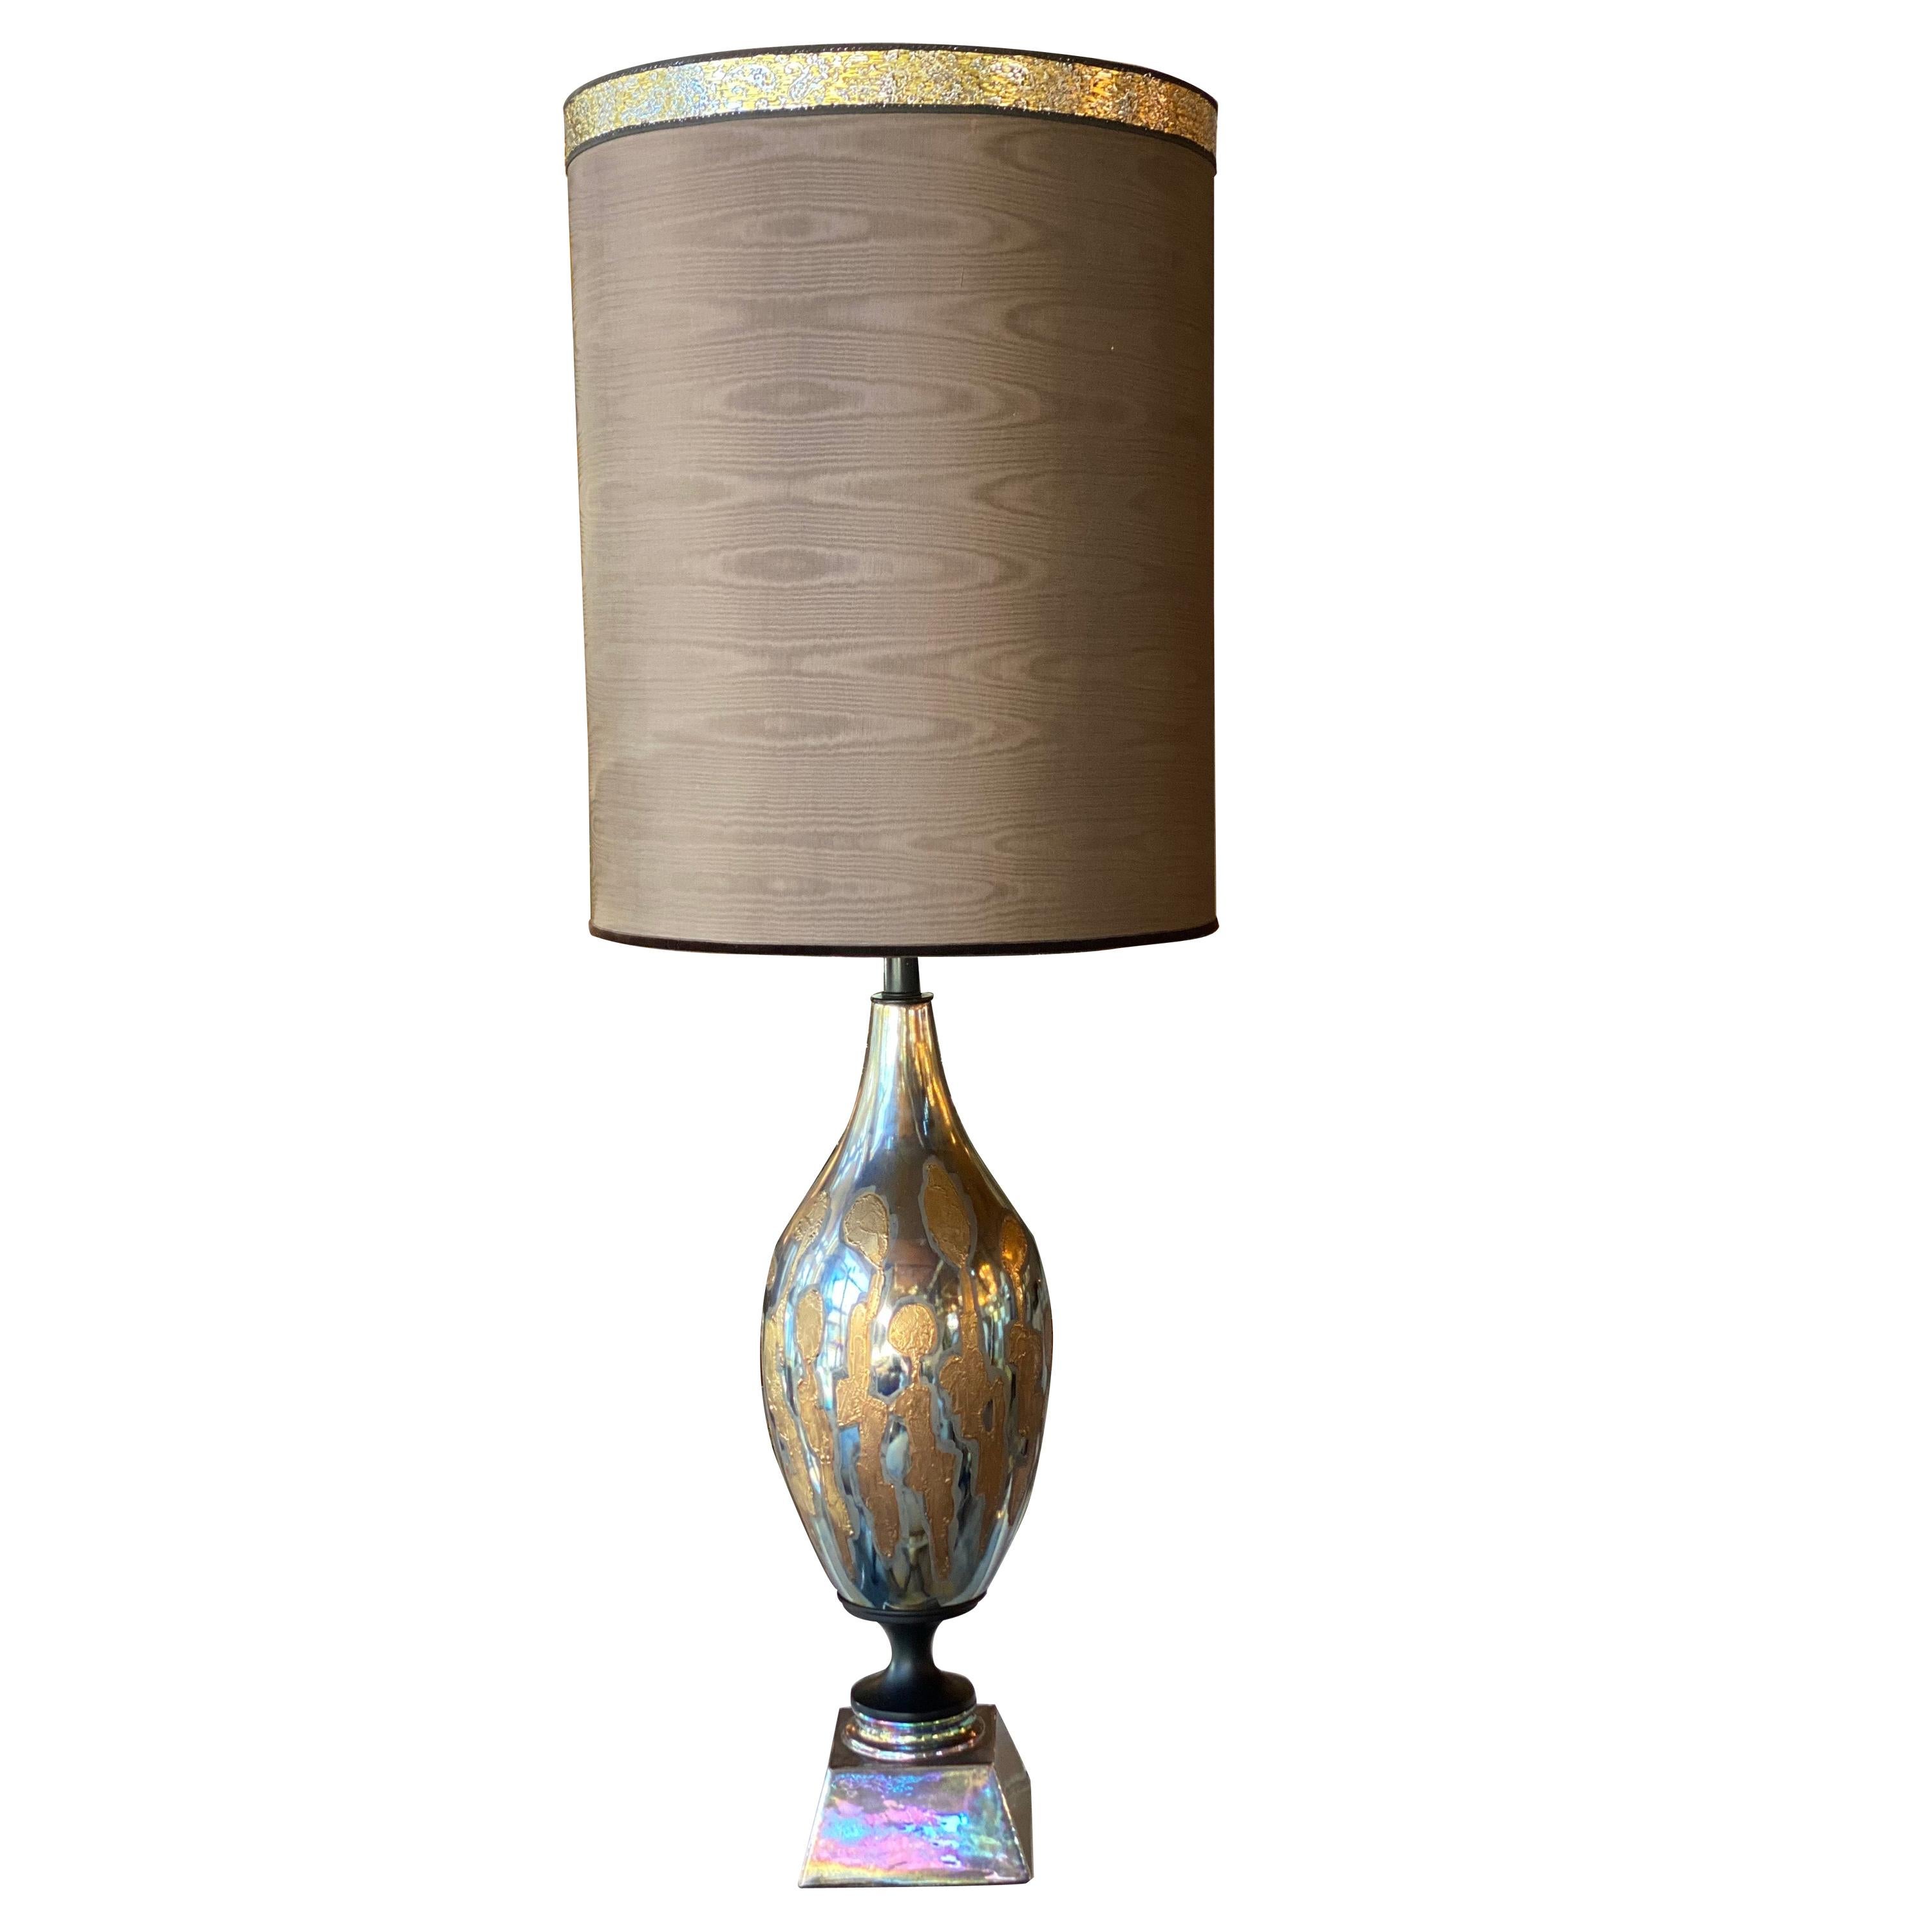 MCM Silver and Gold Lamp with Figures Shade